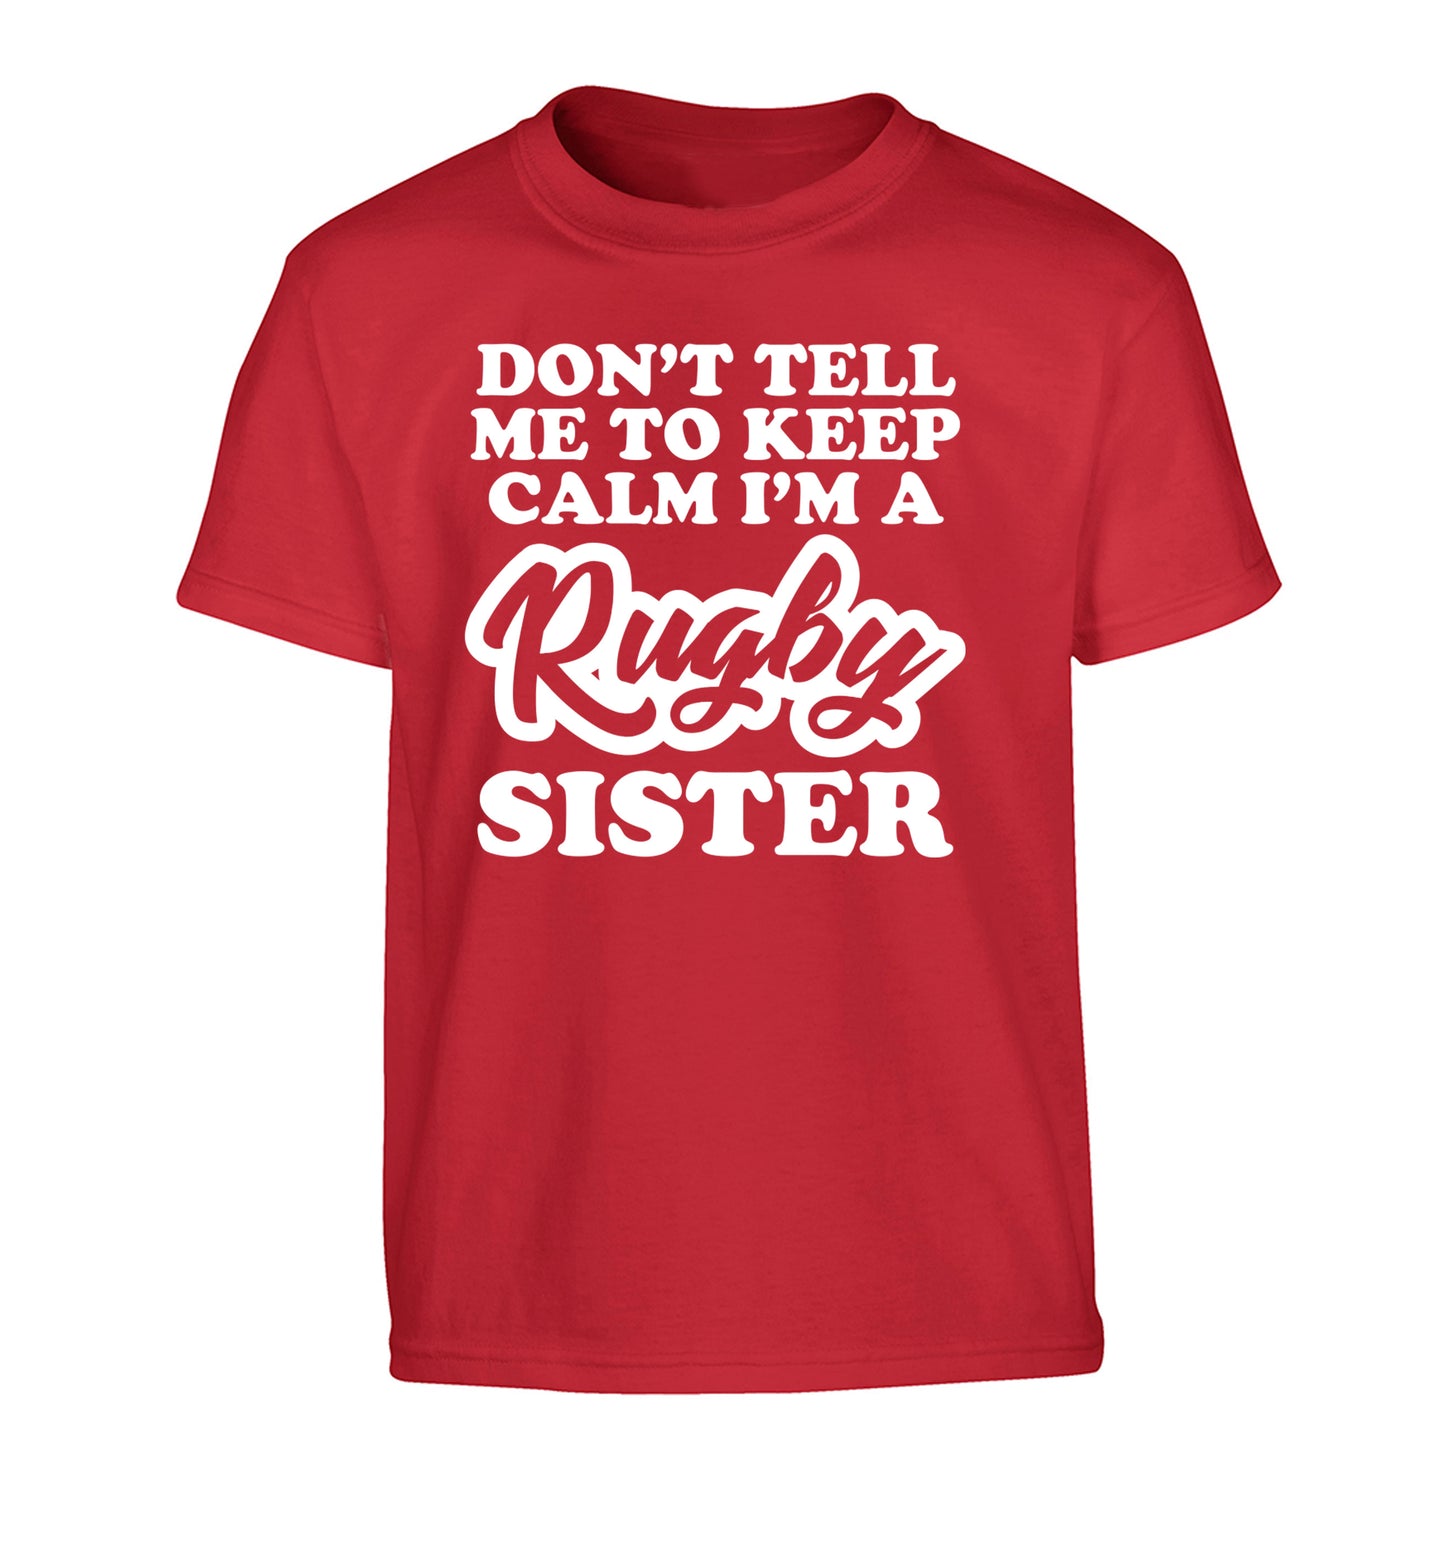 Don't tell me keep calm I'm a rugby sister Children's red Tshirt 12-13 Years